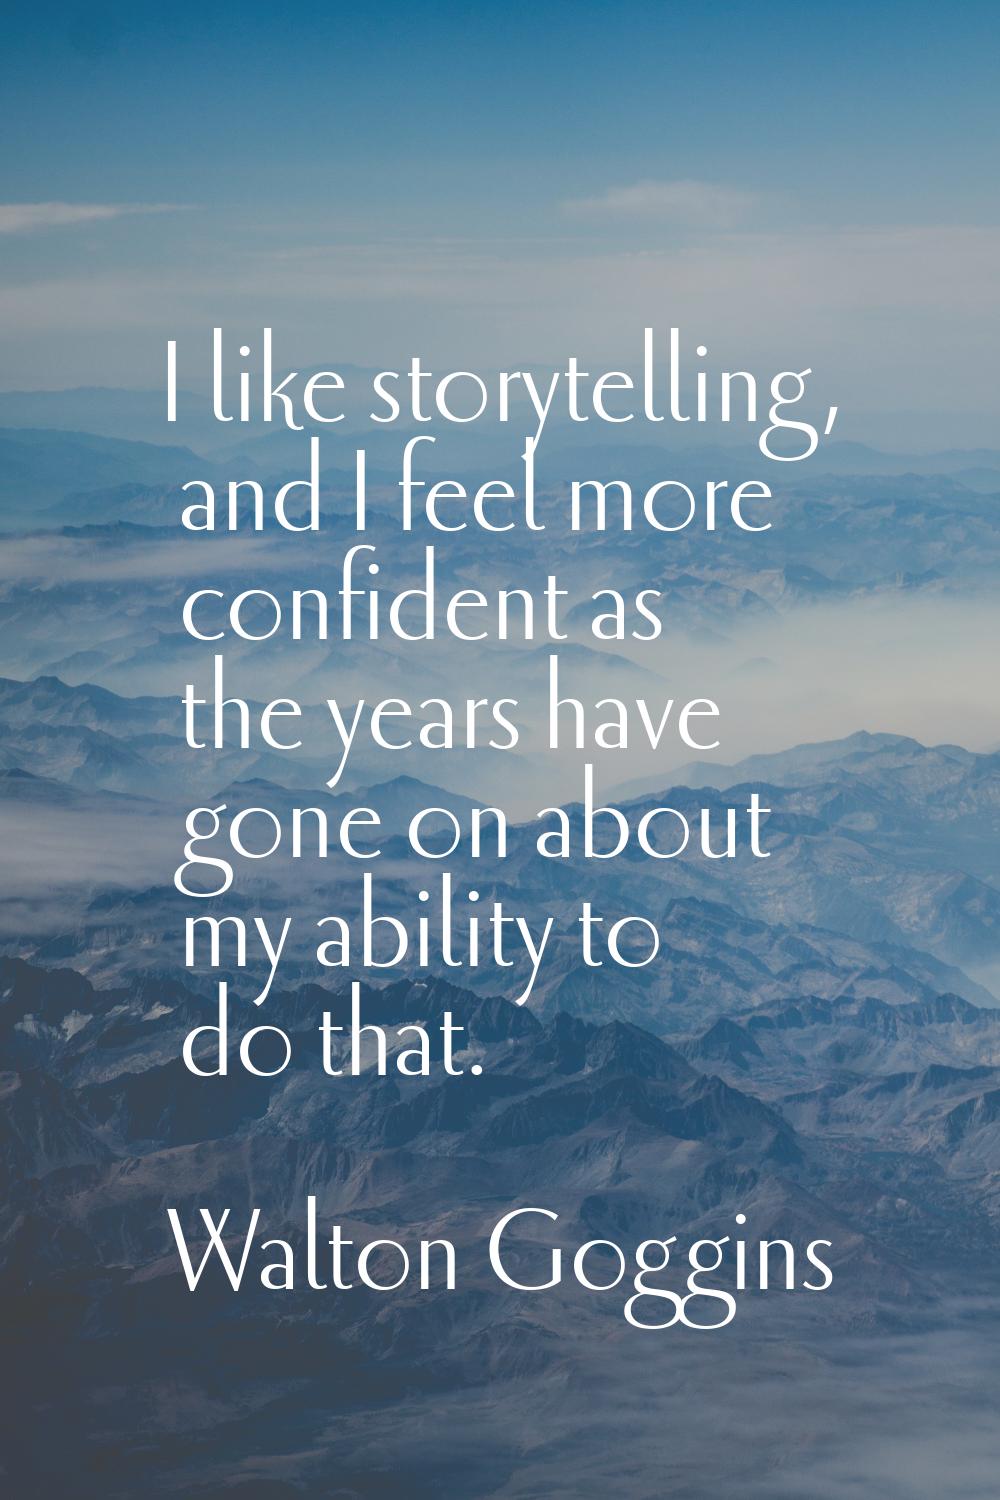 I like storytelling, and I feel more confident as the years have gone on about my ability to do tha